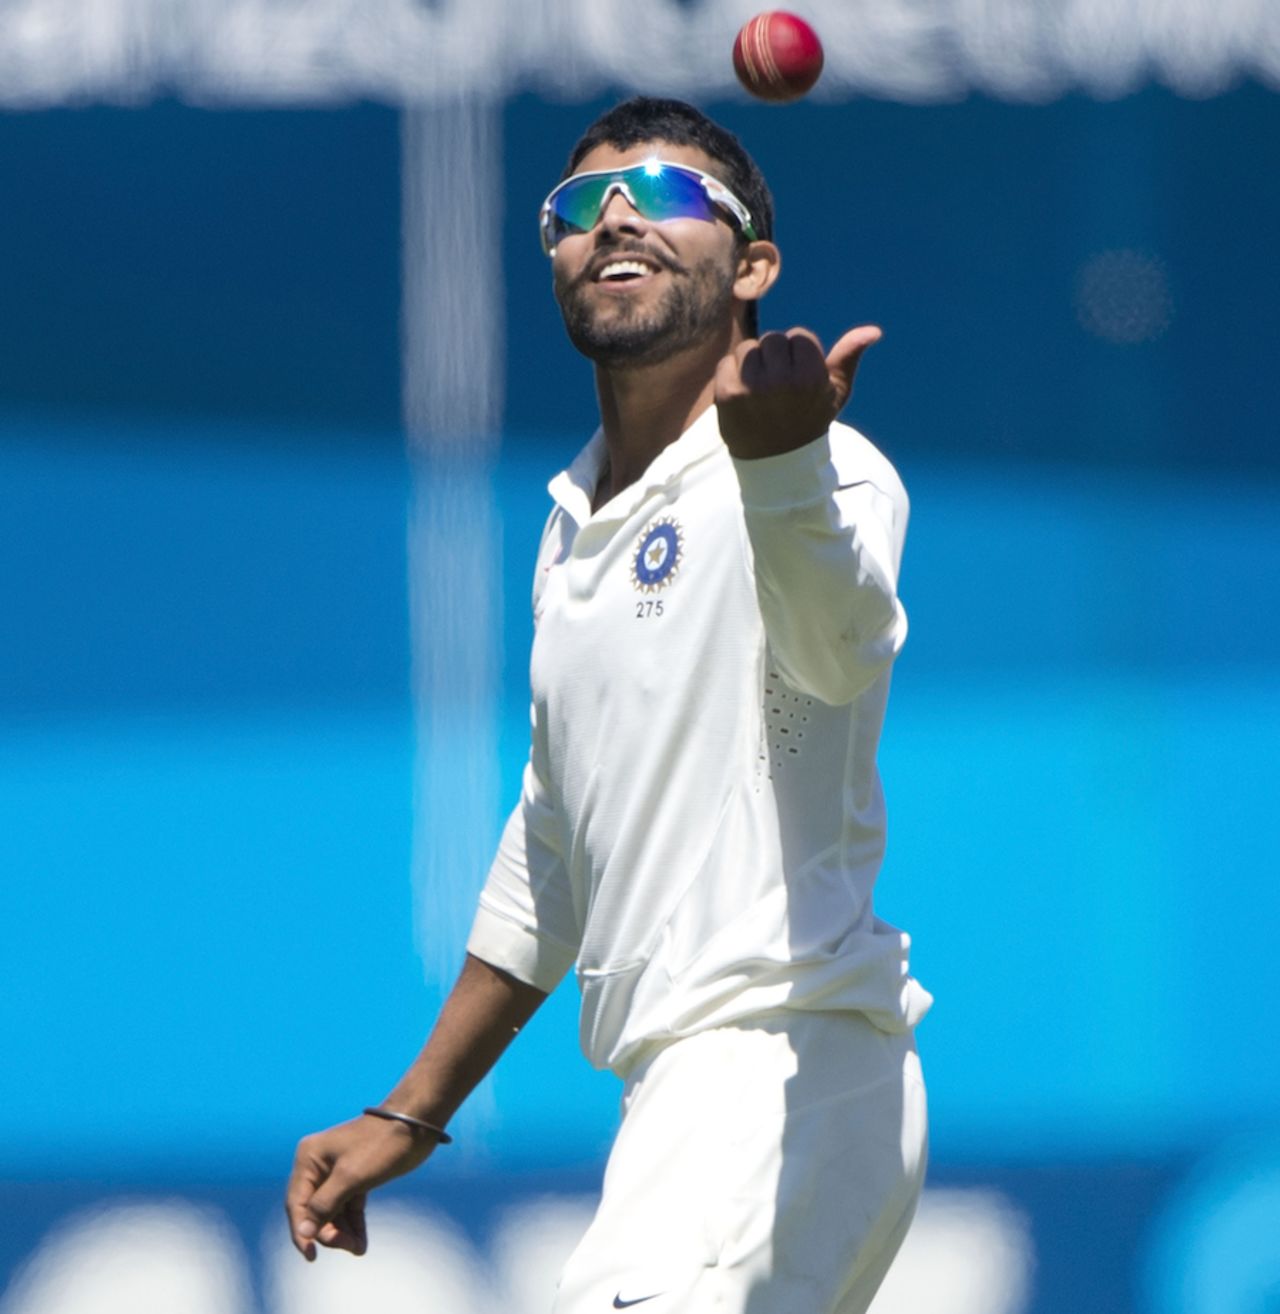 Ravindra Jadeja caught Corey Anderson off his own bowling, New Zealand v India, 2nd Test, 3rd day, Wellington, February 16, 2014